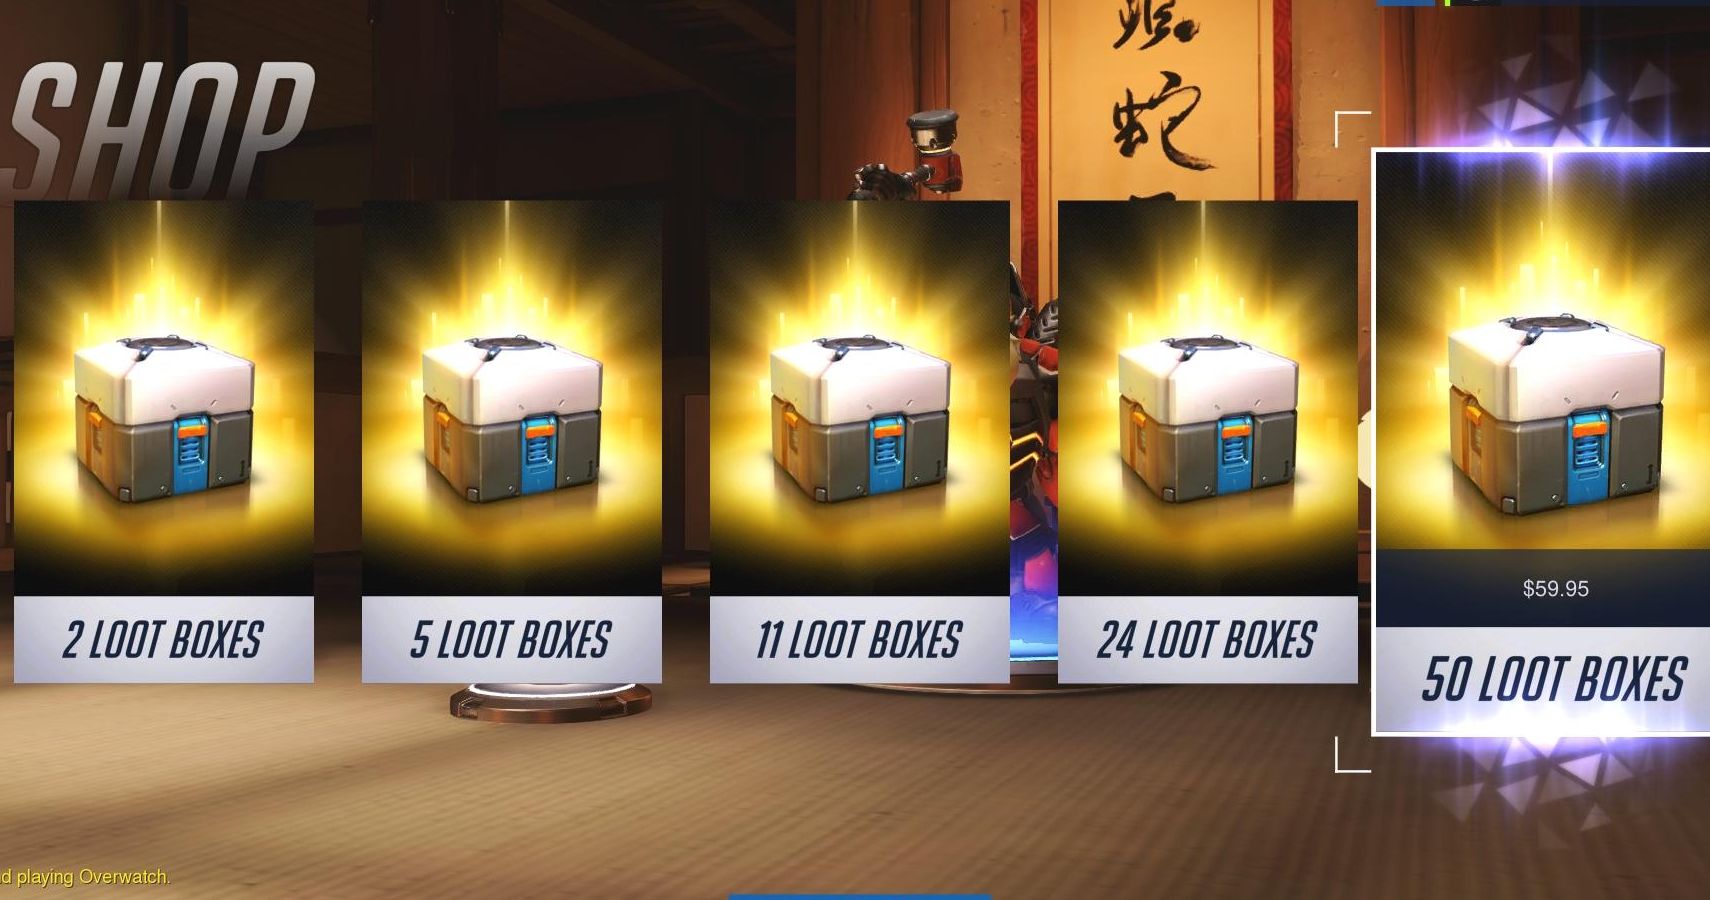 FTC Report Suggests Game Companies Pay Streamers To Market Loot Boxes